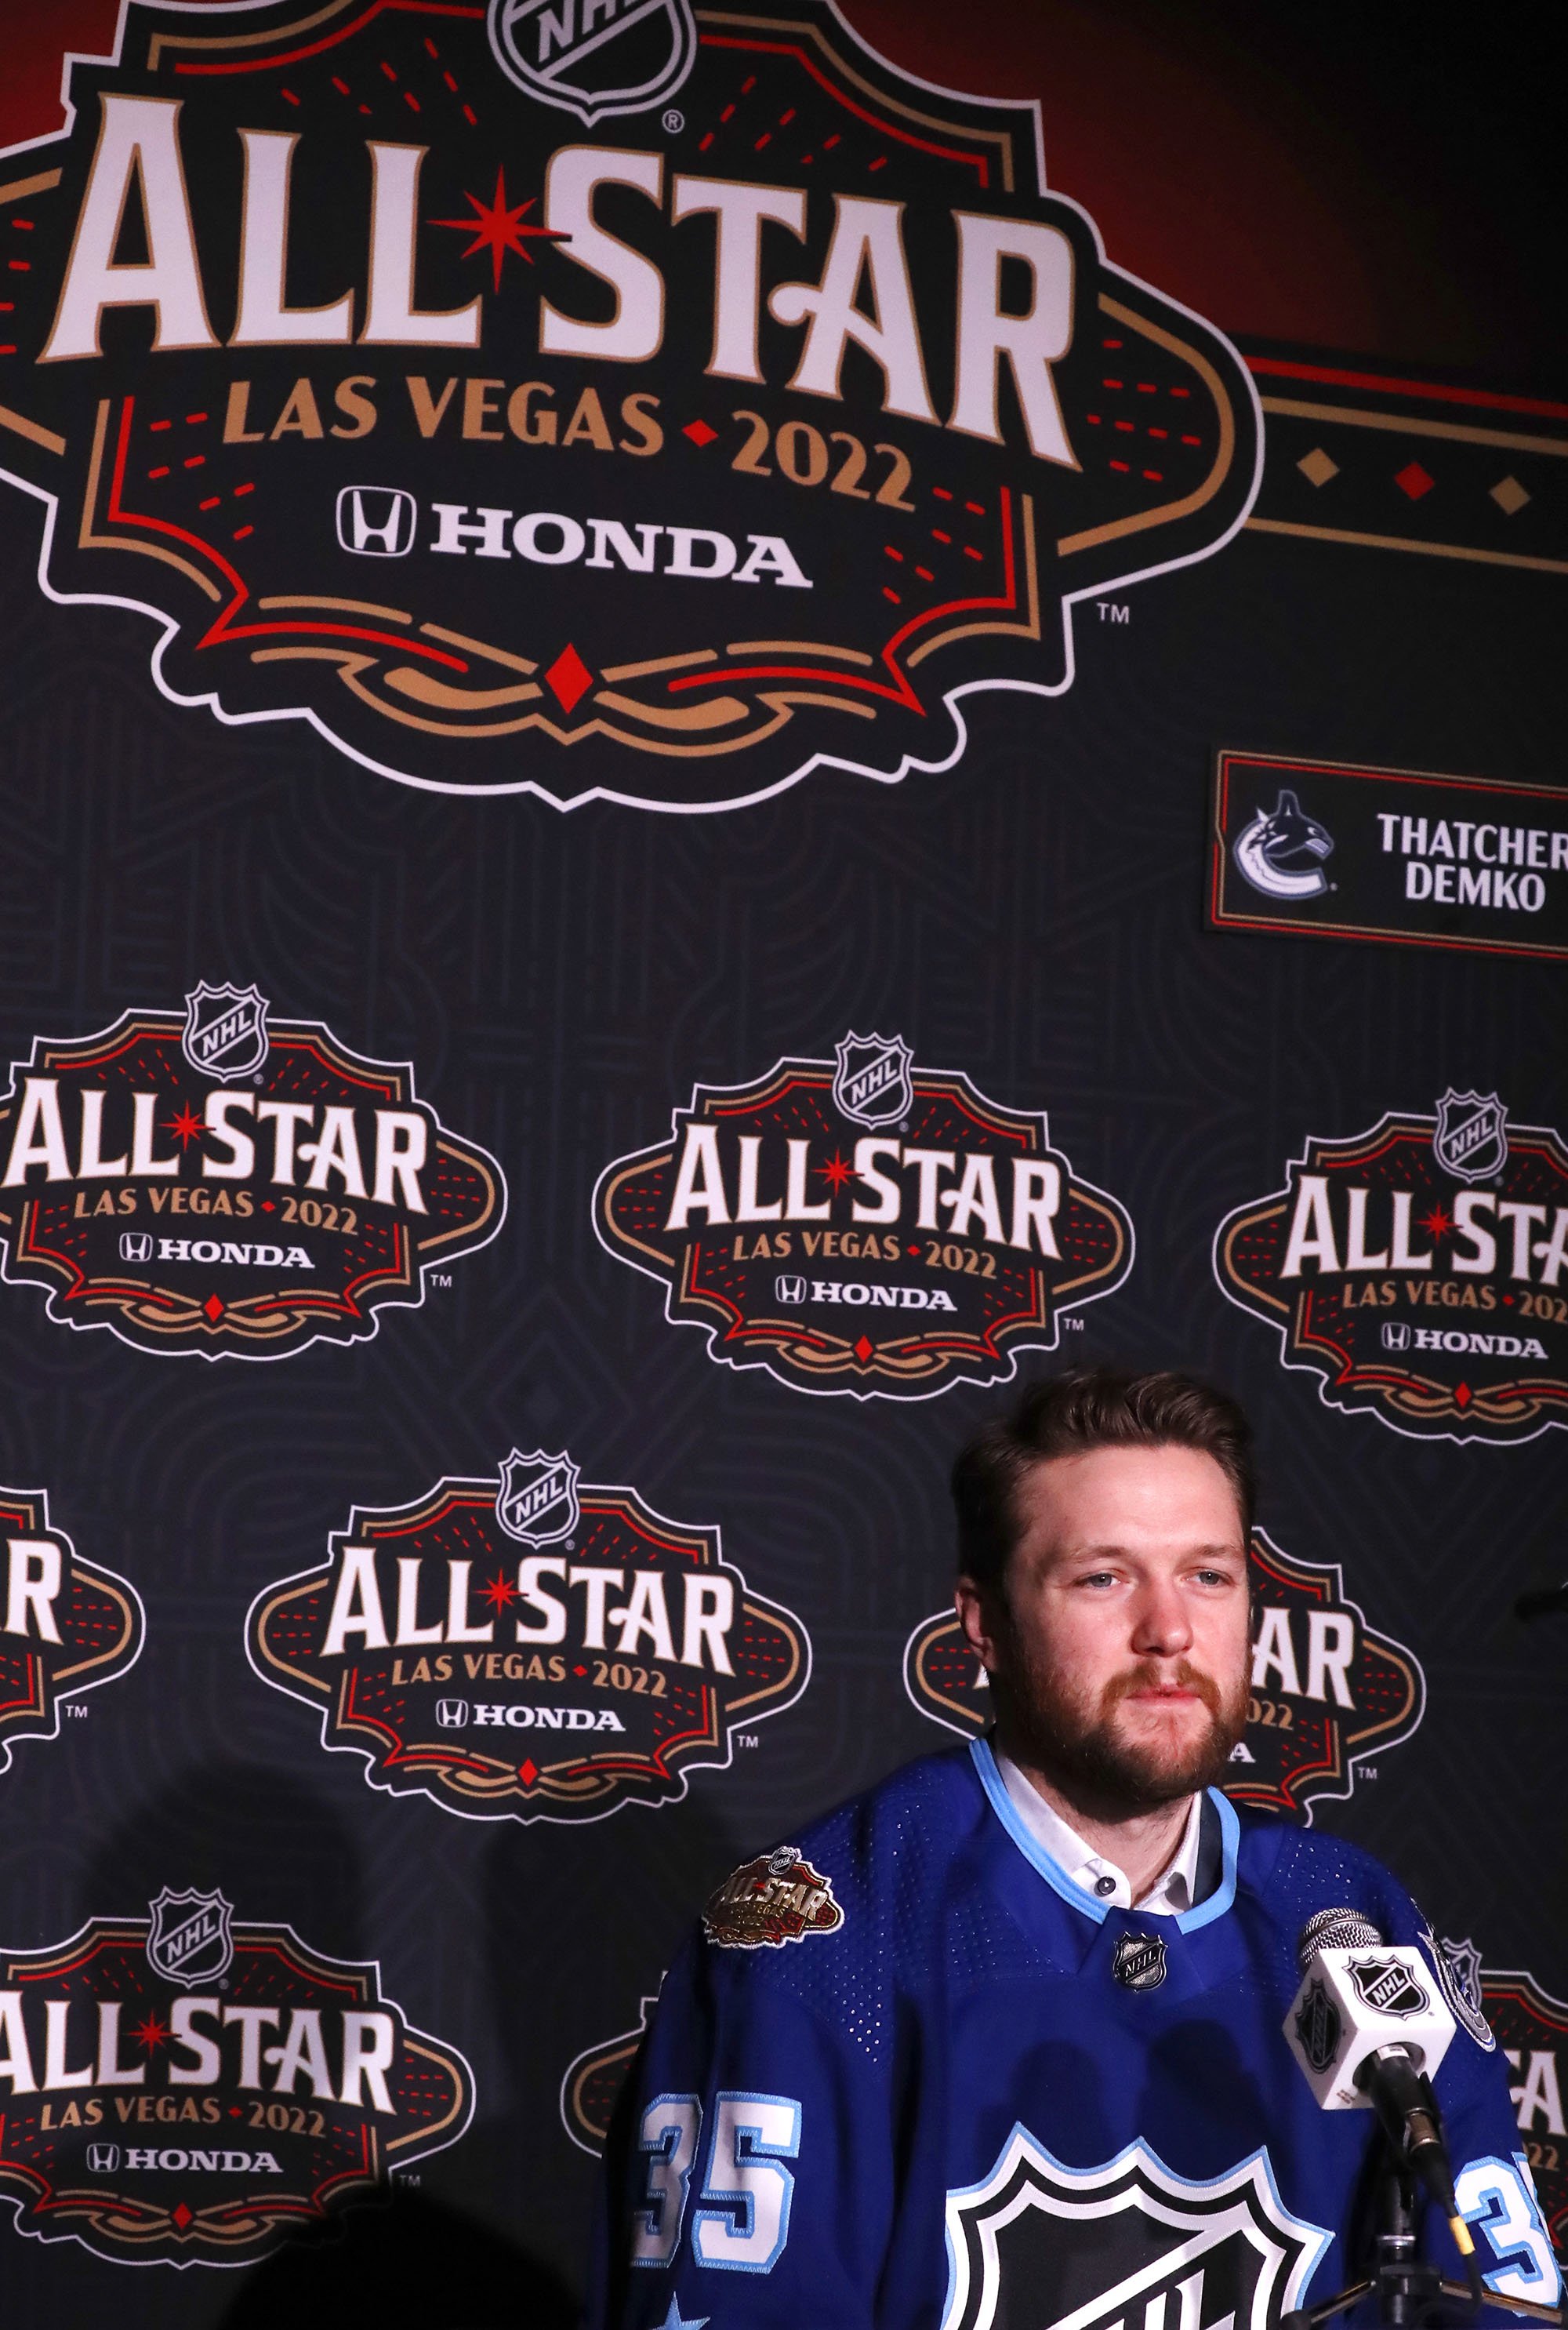 Las Vegas to Host the 2022 NHL All-Star Weekend - Informed Tourism